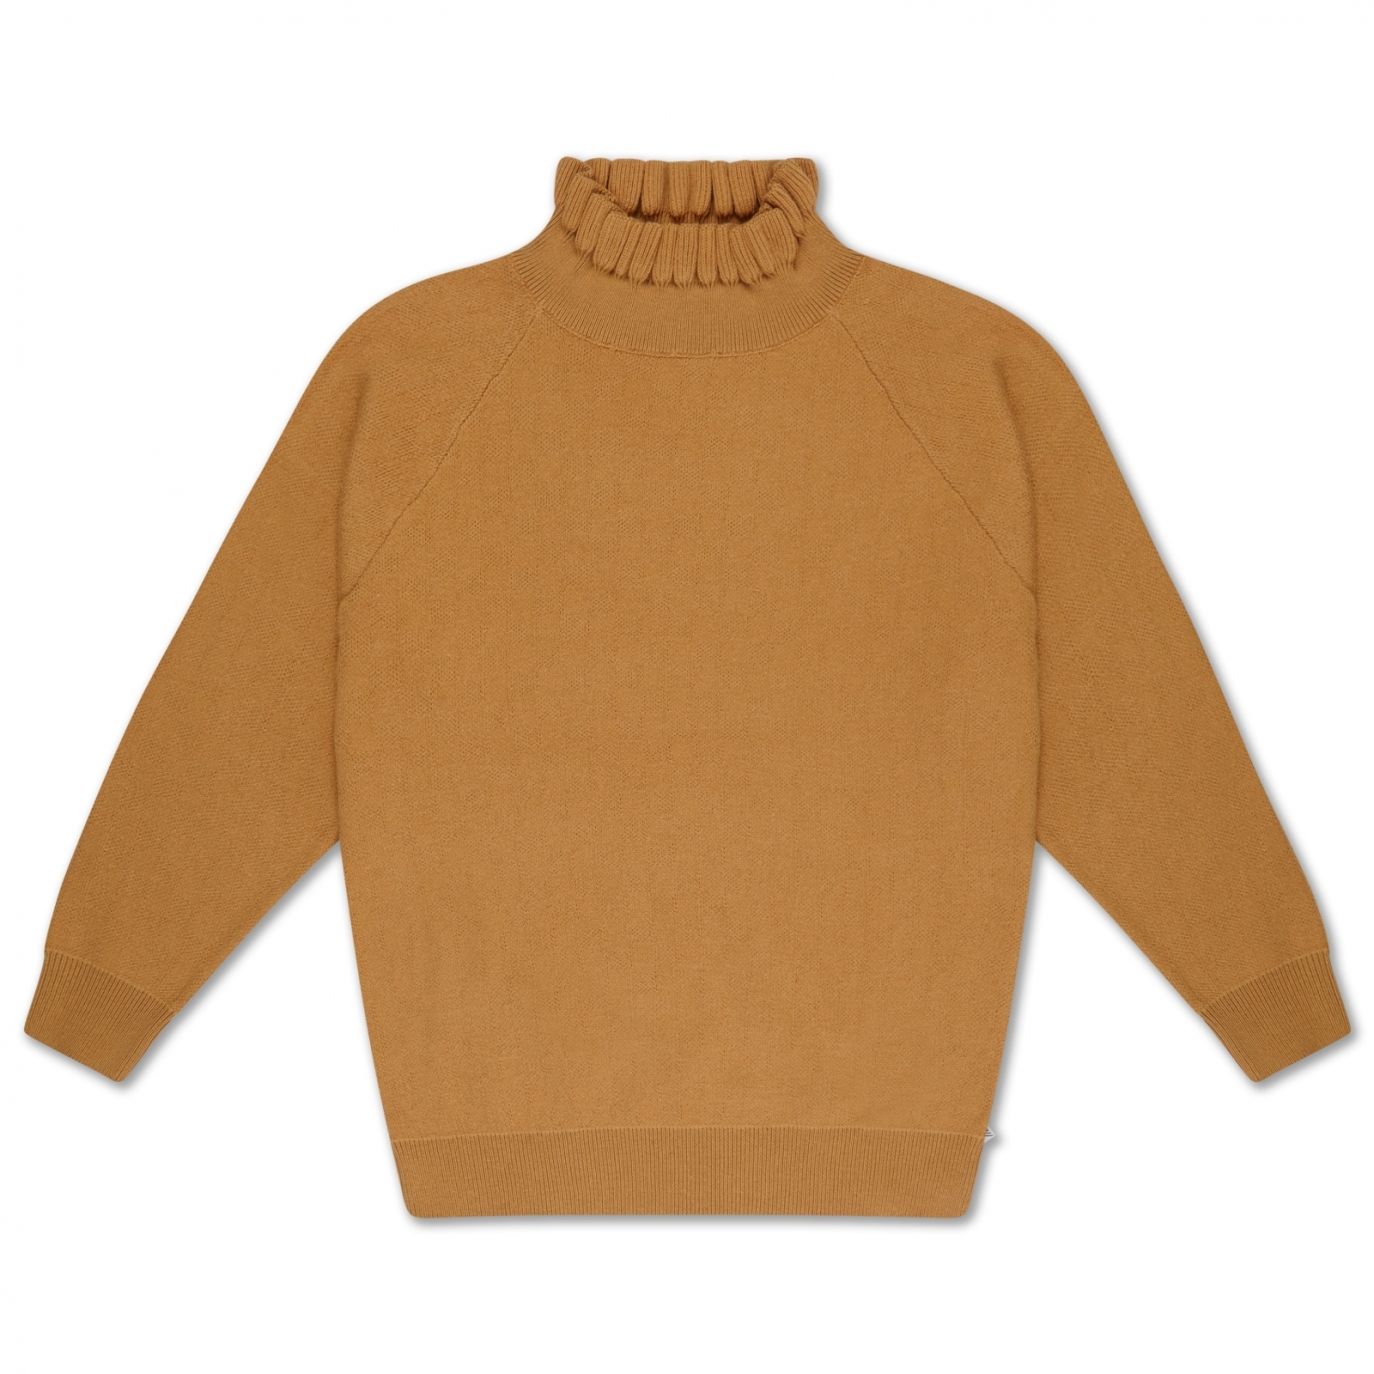 Repose AMS Knit turtleneck Sweater Smooth Camel Brown SS20-62 